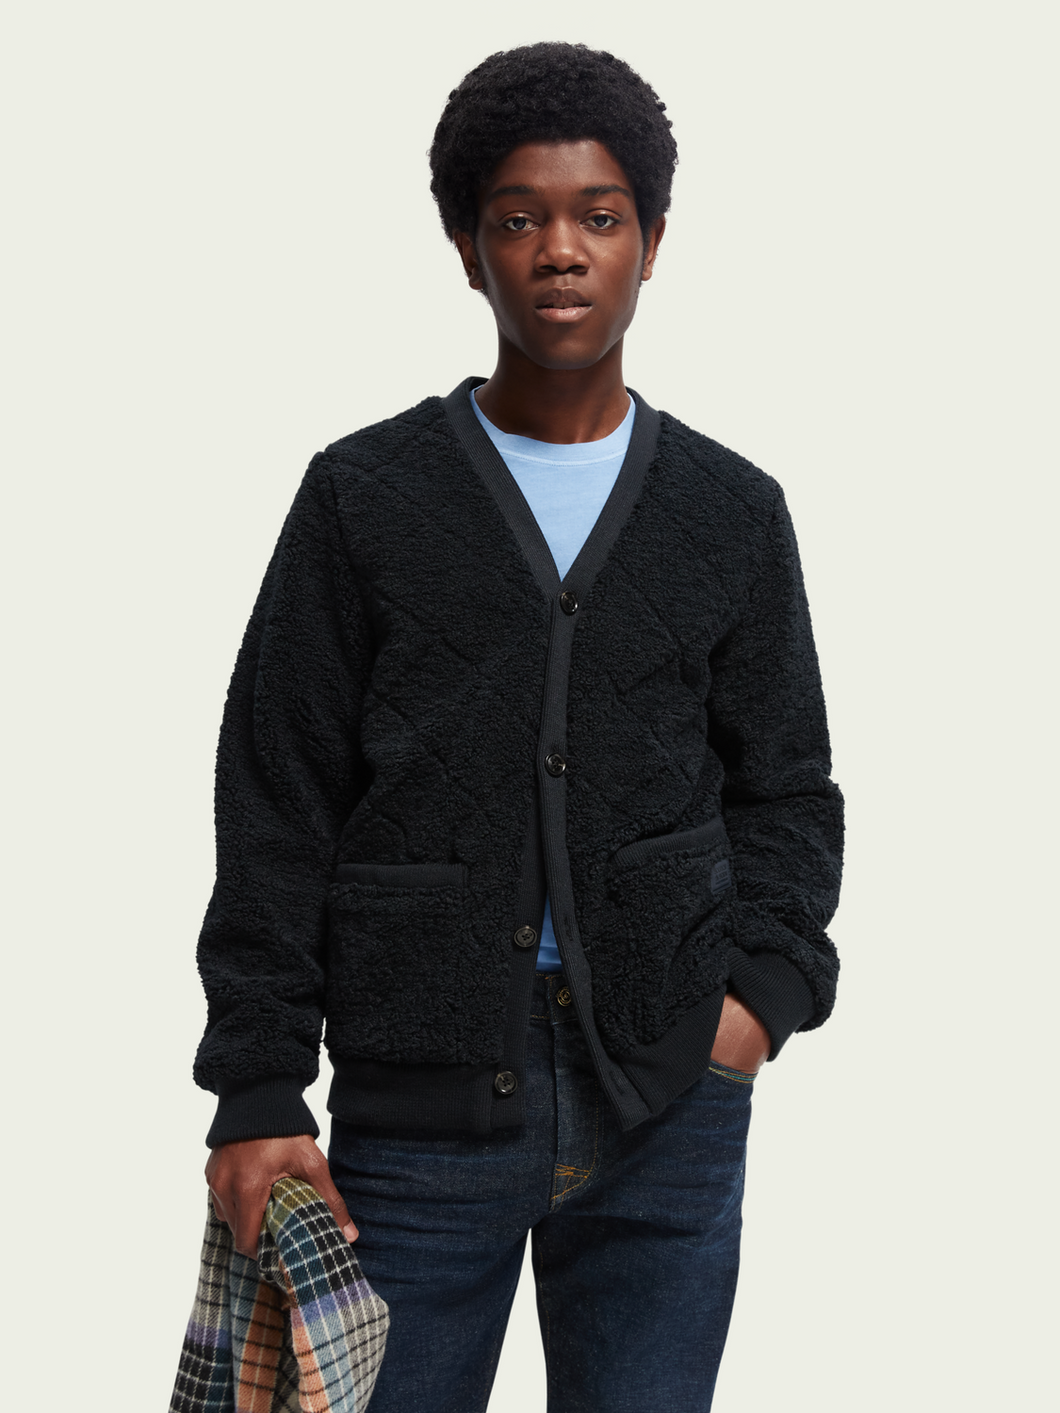 Scotch & Soda Mens Quilted Teddy Cardigan in Navy - FINAL SALE